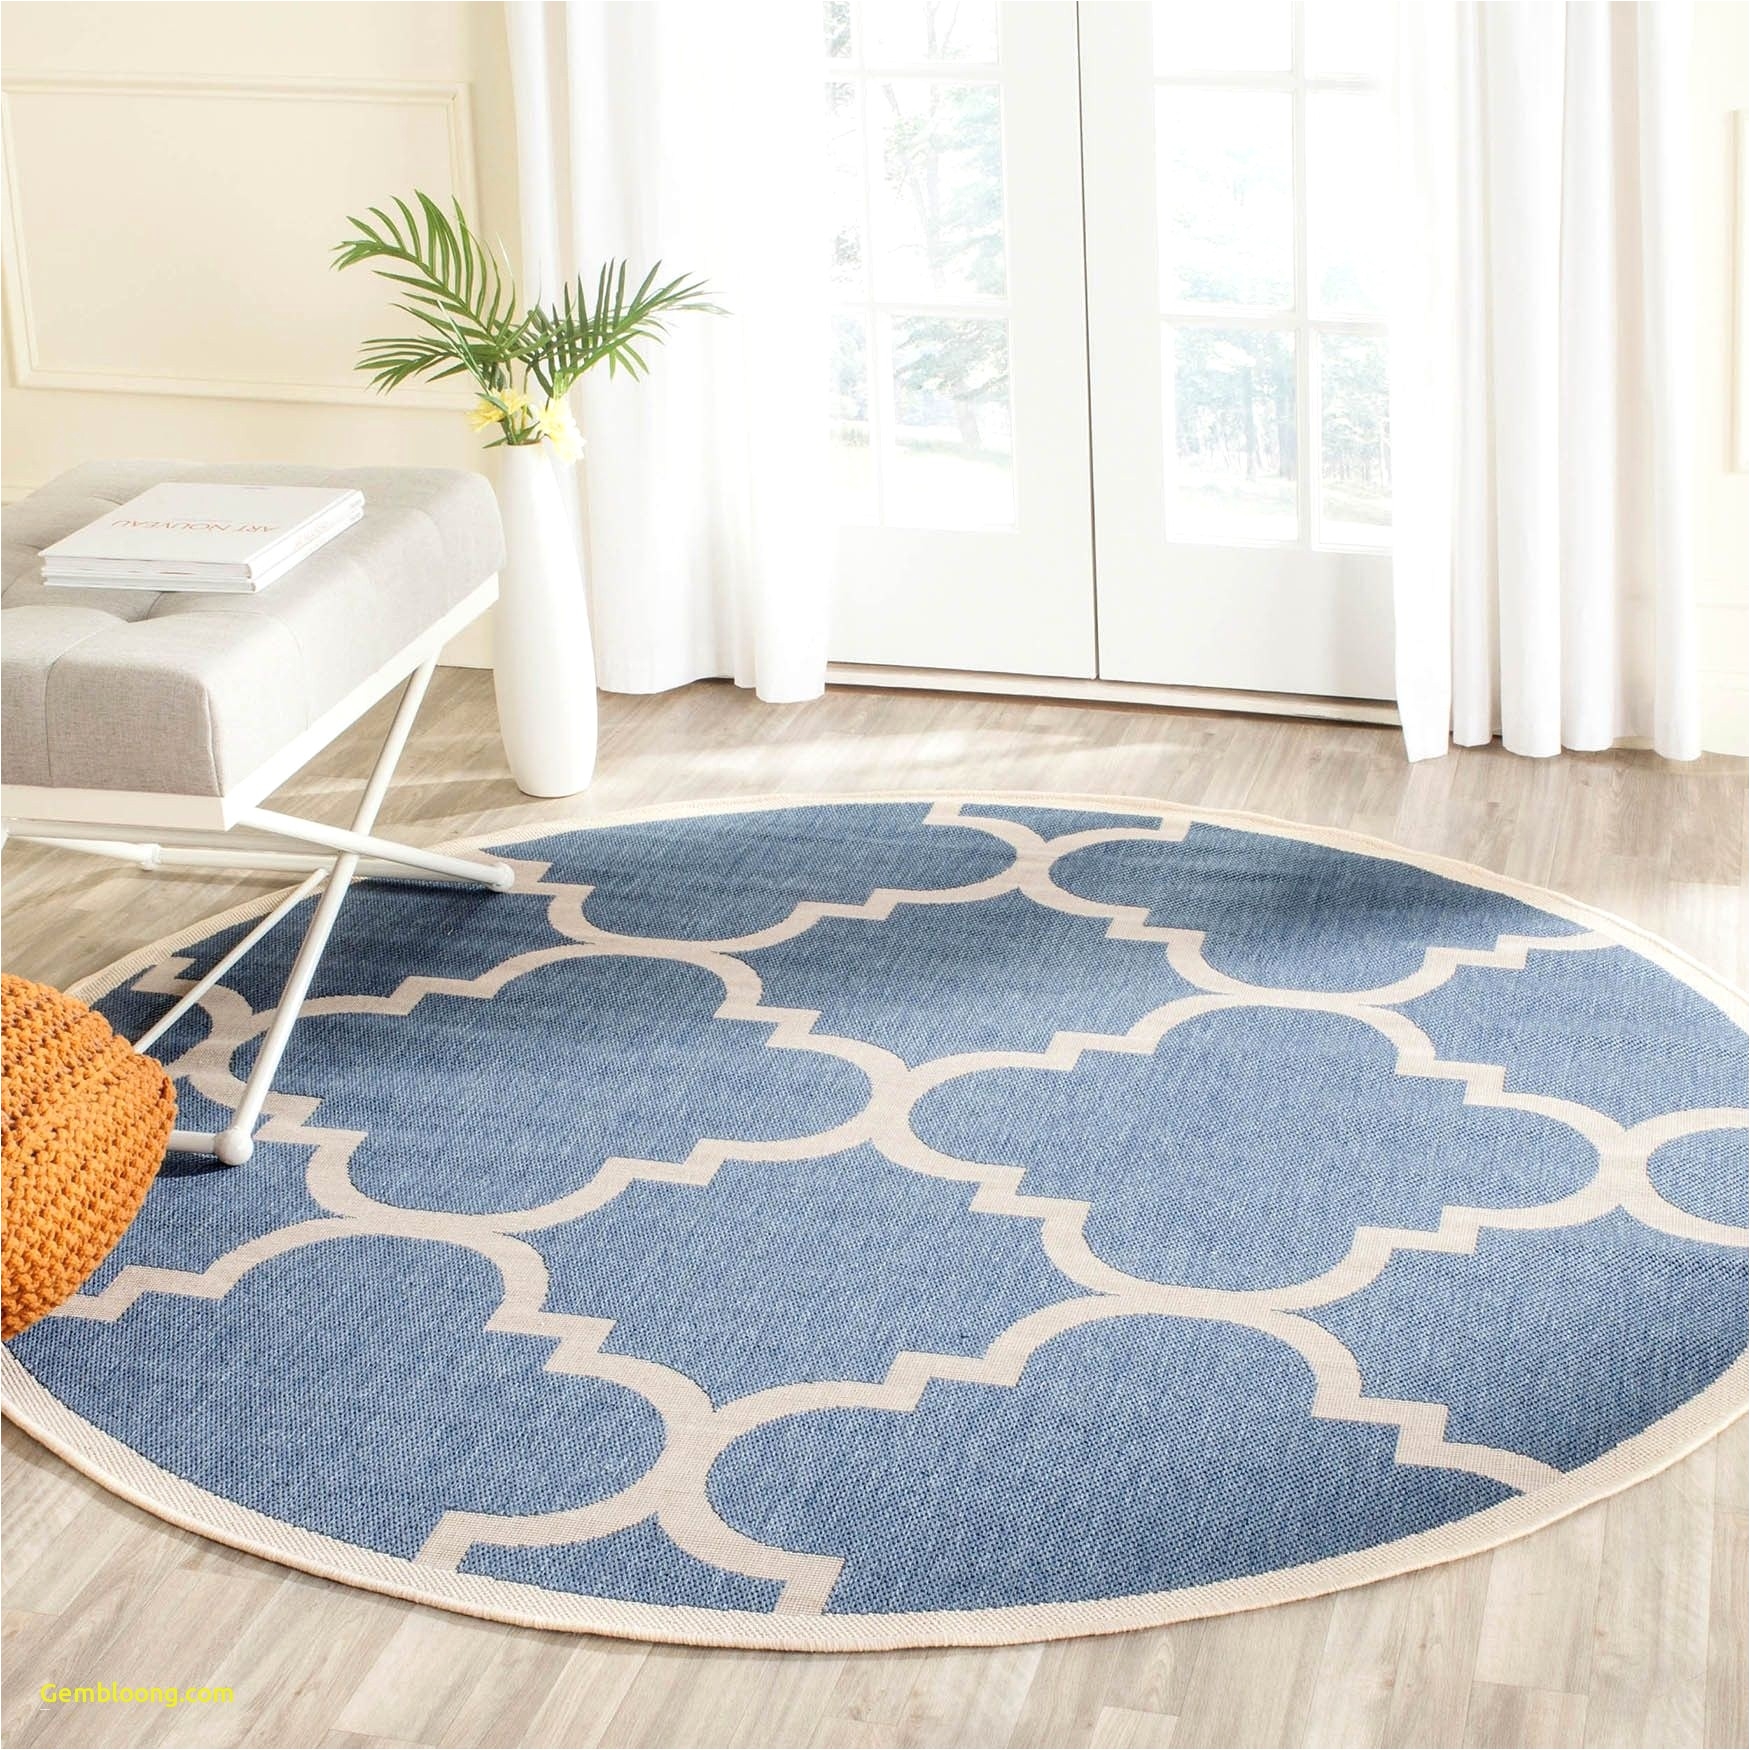 full size of home design outdoor patio rug fresh outdoor rug ideas new patio carpet large size of home design outdoor patio rug fresh outdoor rug ideas new